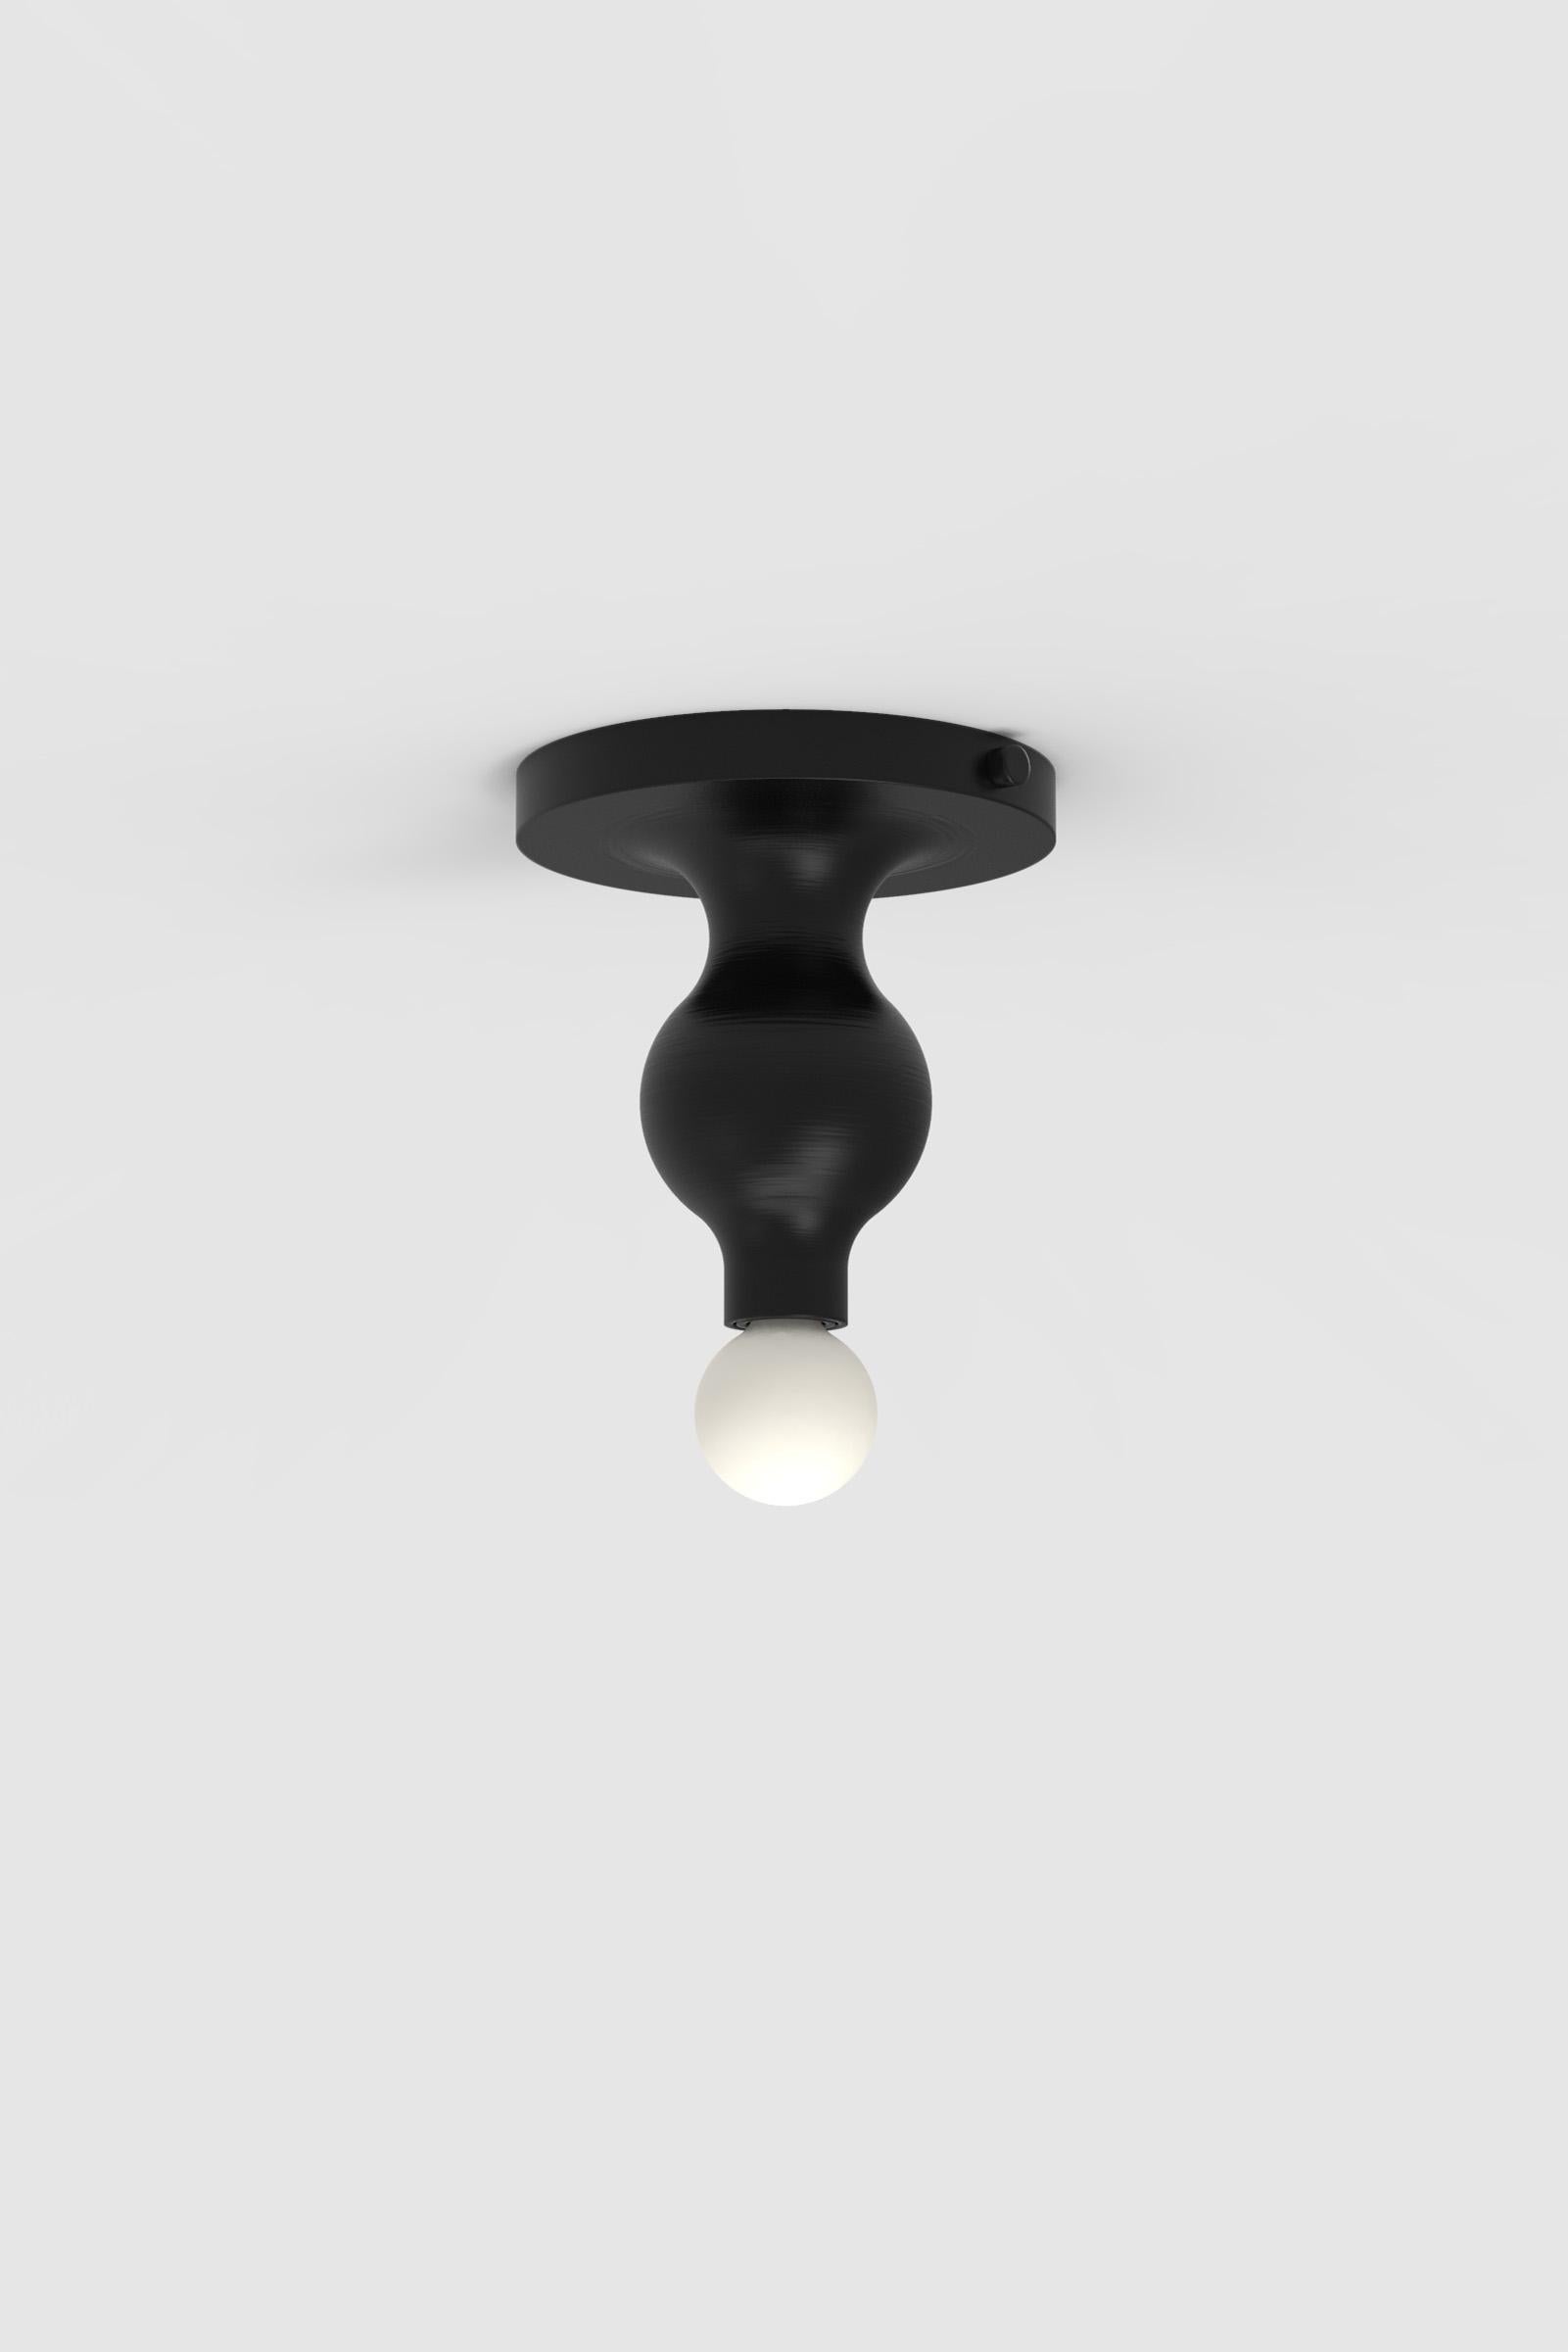 Orphan Work 300 flush mount BLK
Shown in black wood
6” Diameter x 6.5” Height (not including bulb)
UL approved
Holds (1) 60W candelabra bulb
Must use LED bulb

Orphan Work is designed to complement in the heart of Soho, New York City. Each piece is